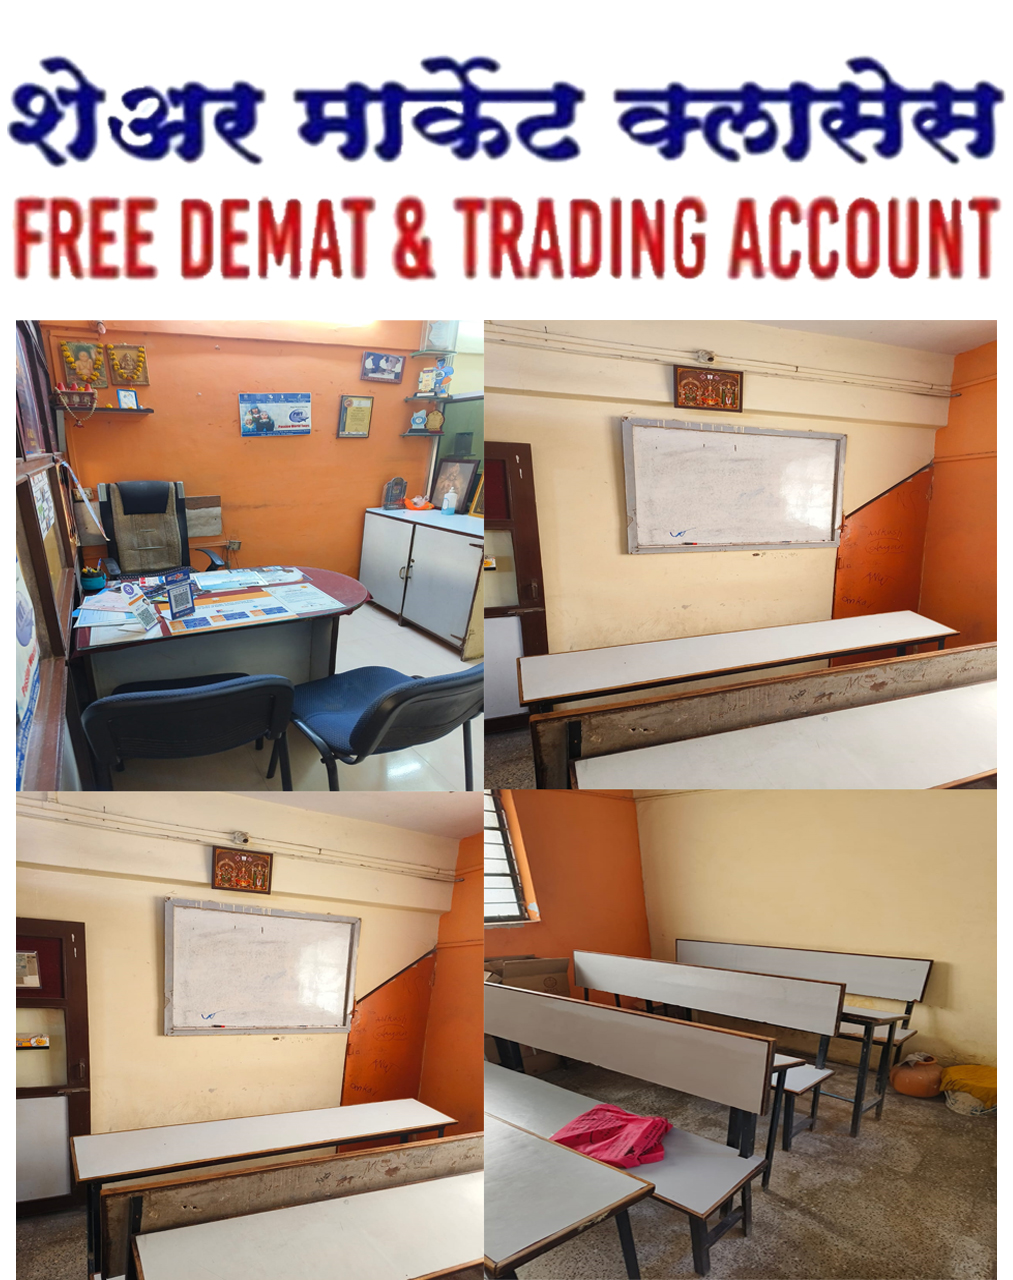 ???? ??????? ???????<br> FREE DEMAT & TRADING ACCOUNT